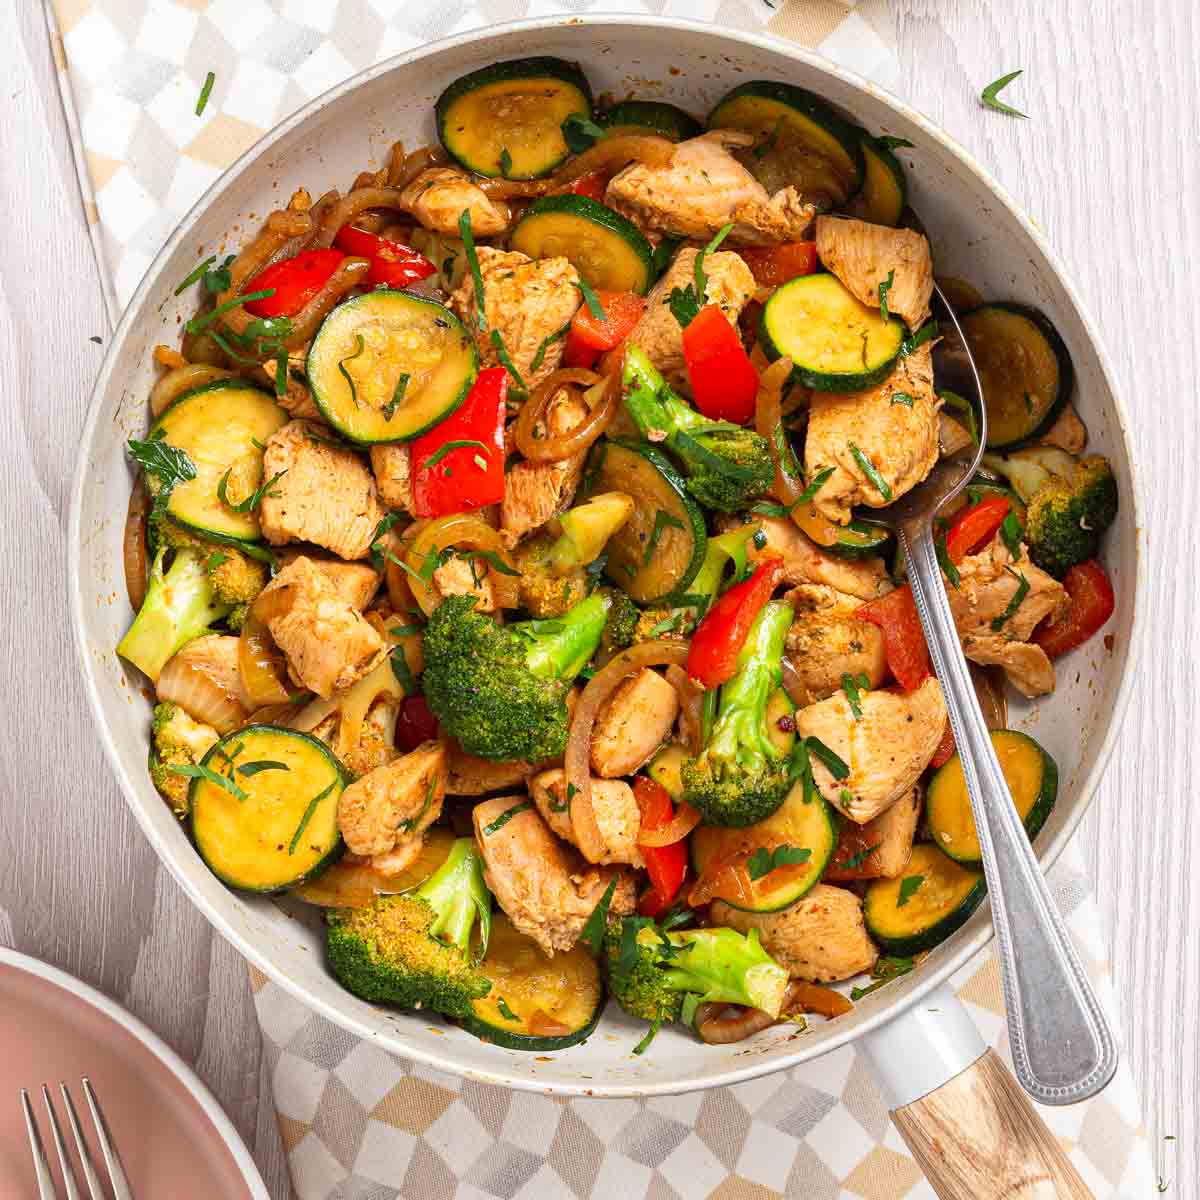 A keto chicken vegetable skillet with stir-fried chicken and  vegetables.